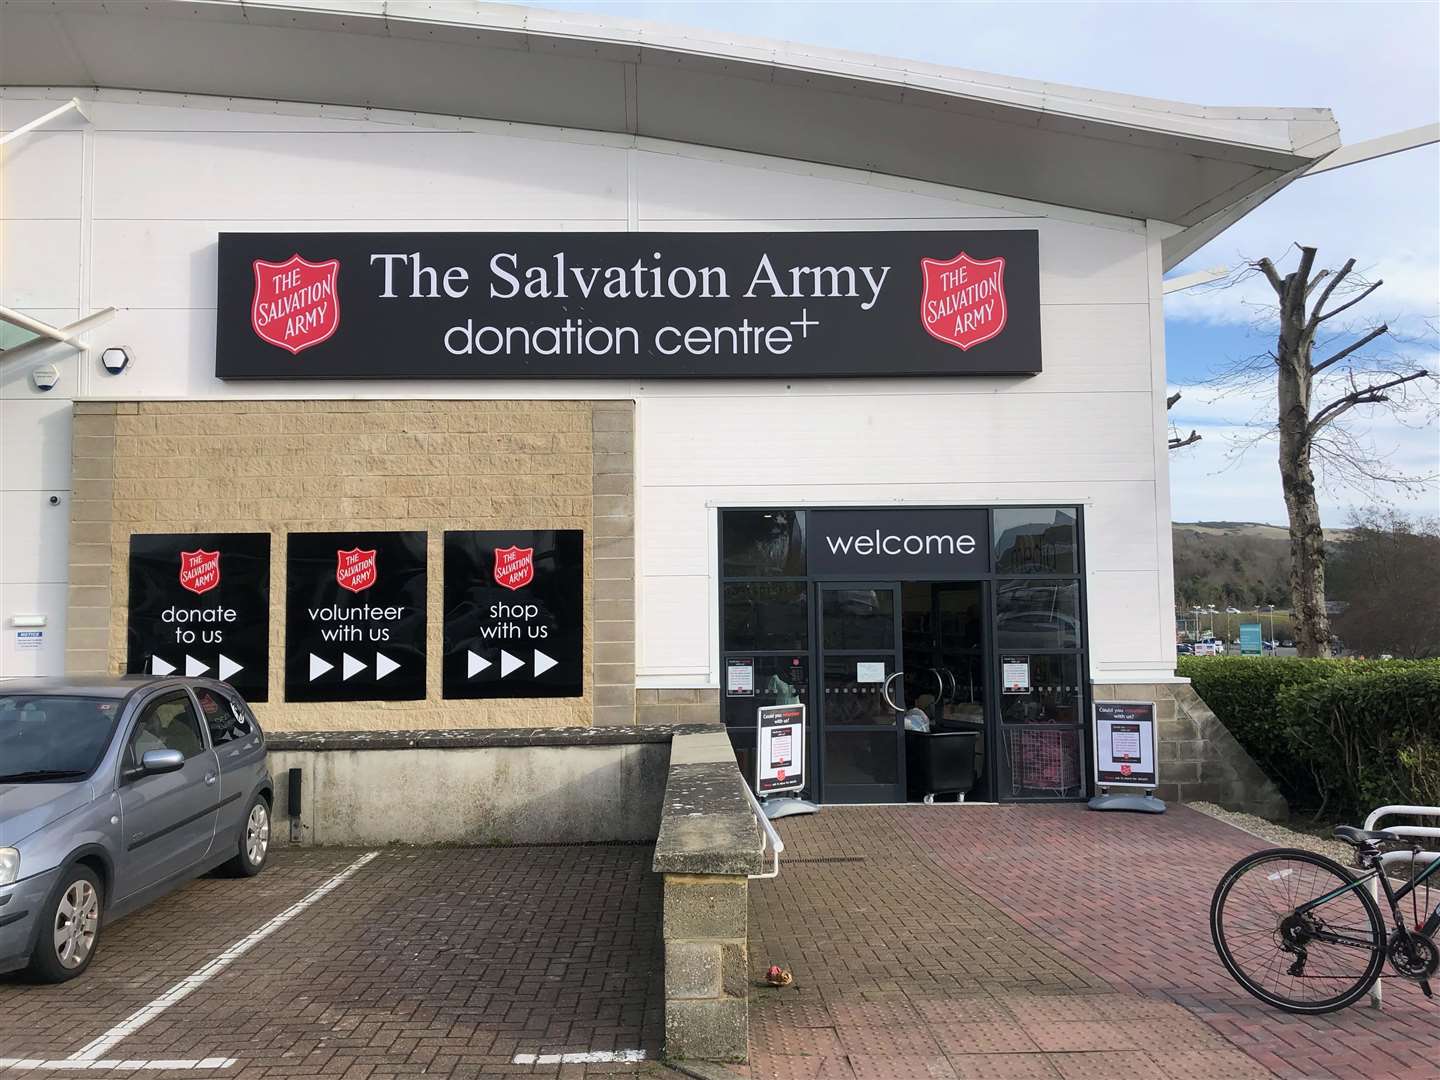 The Folkestone store is the first Salvation Army donation centre in the county